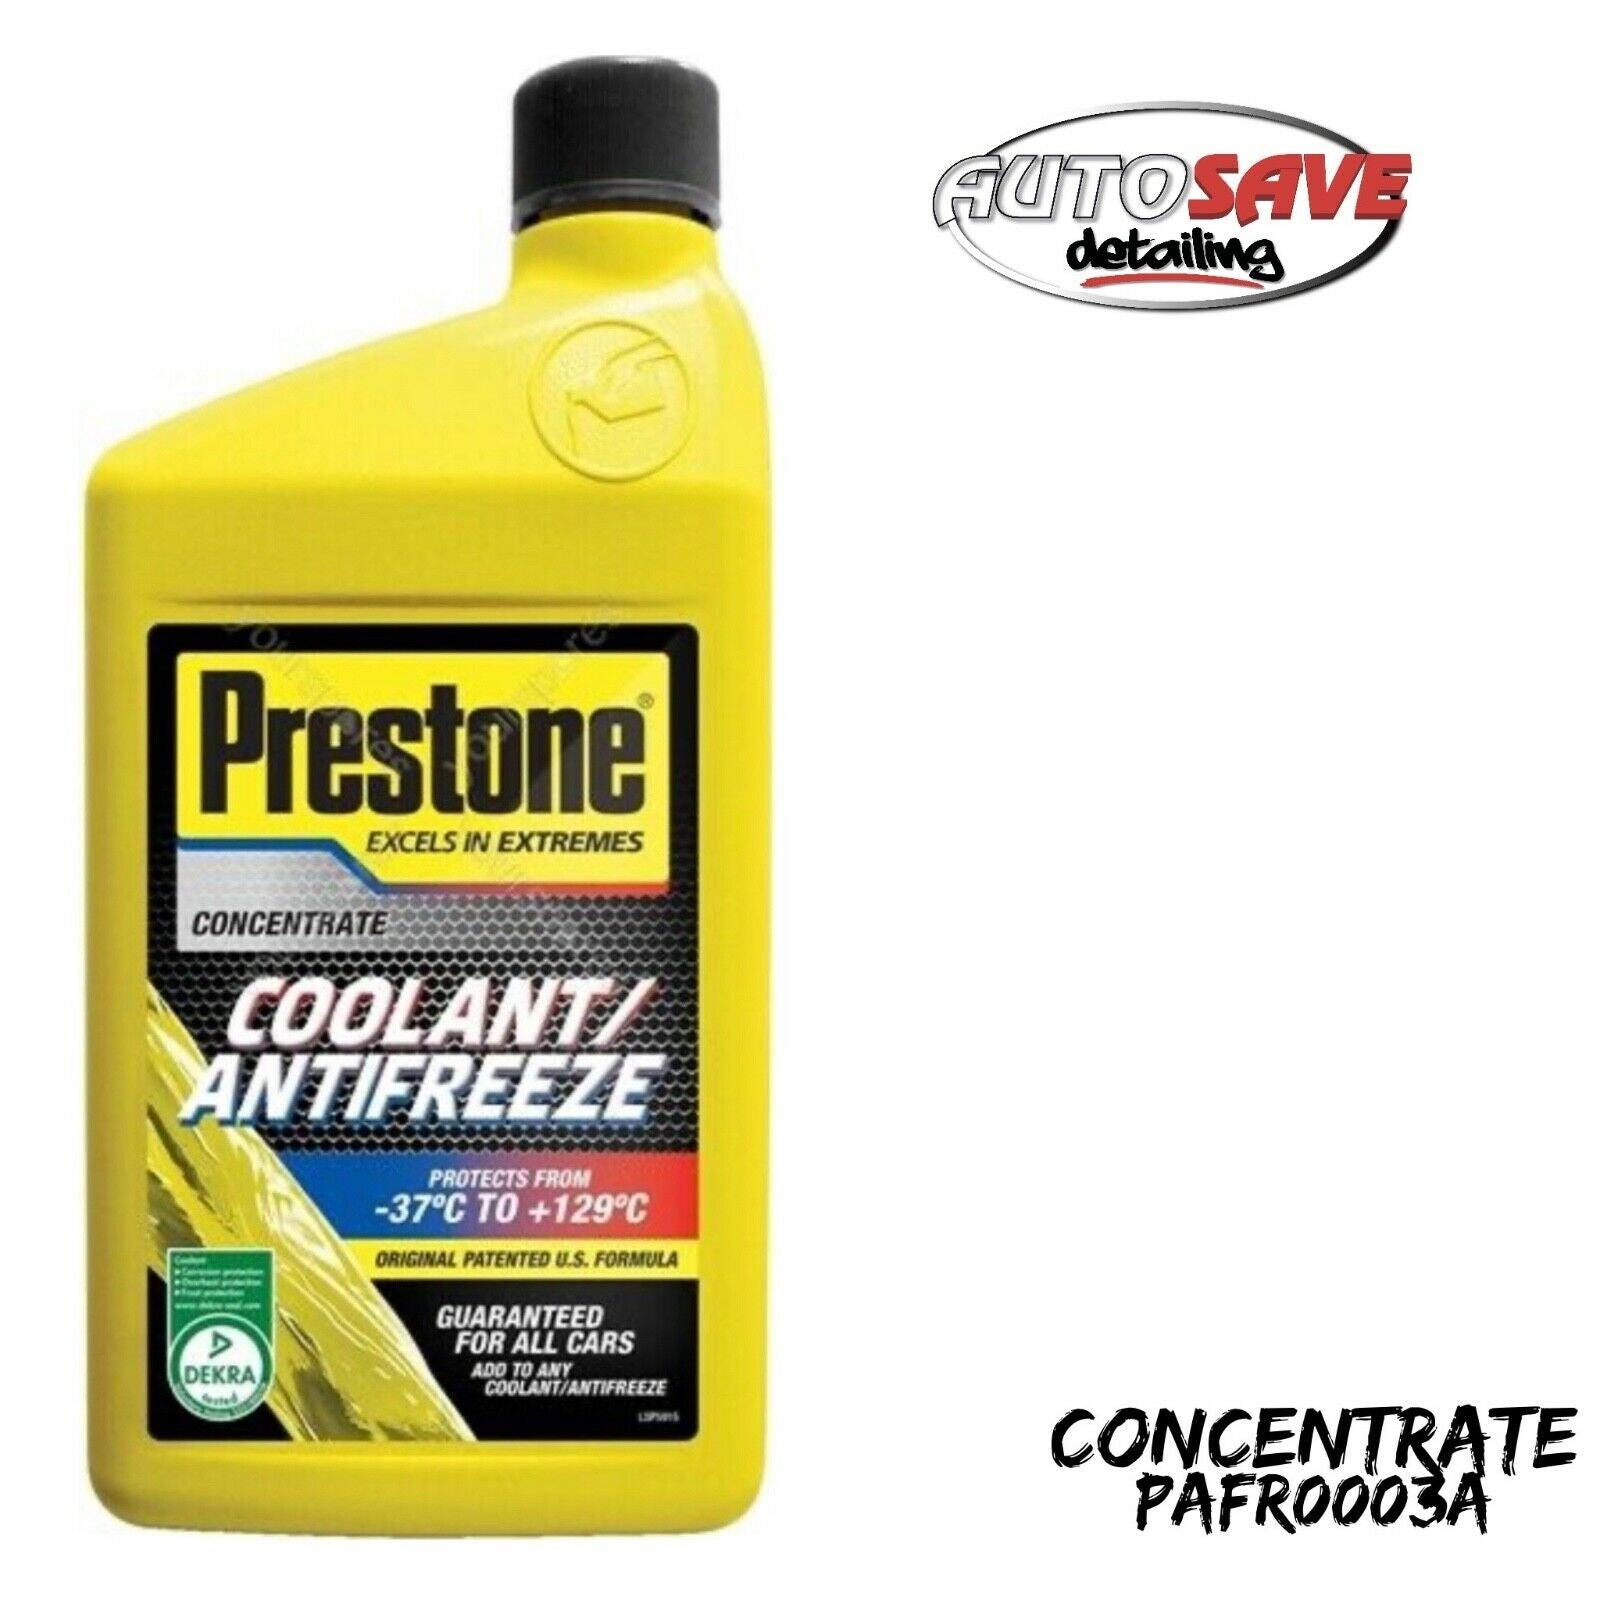 Add Antifreeze or Coolant This Winter to Protect Your Car from